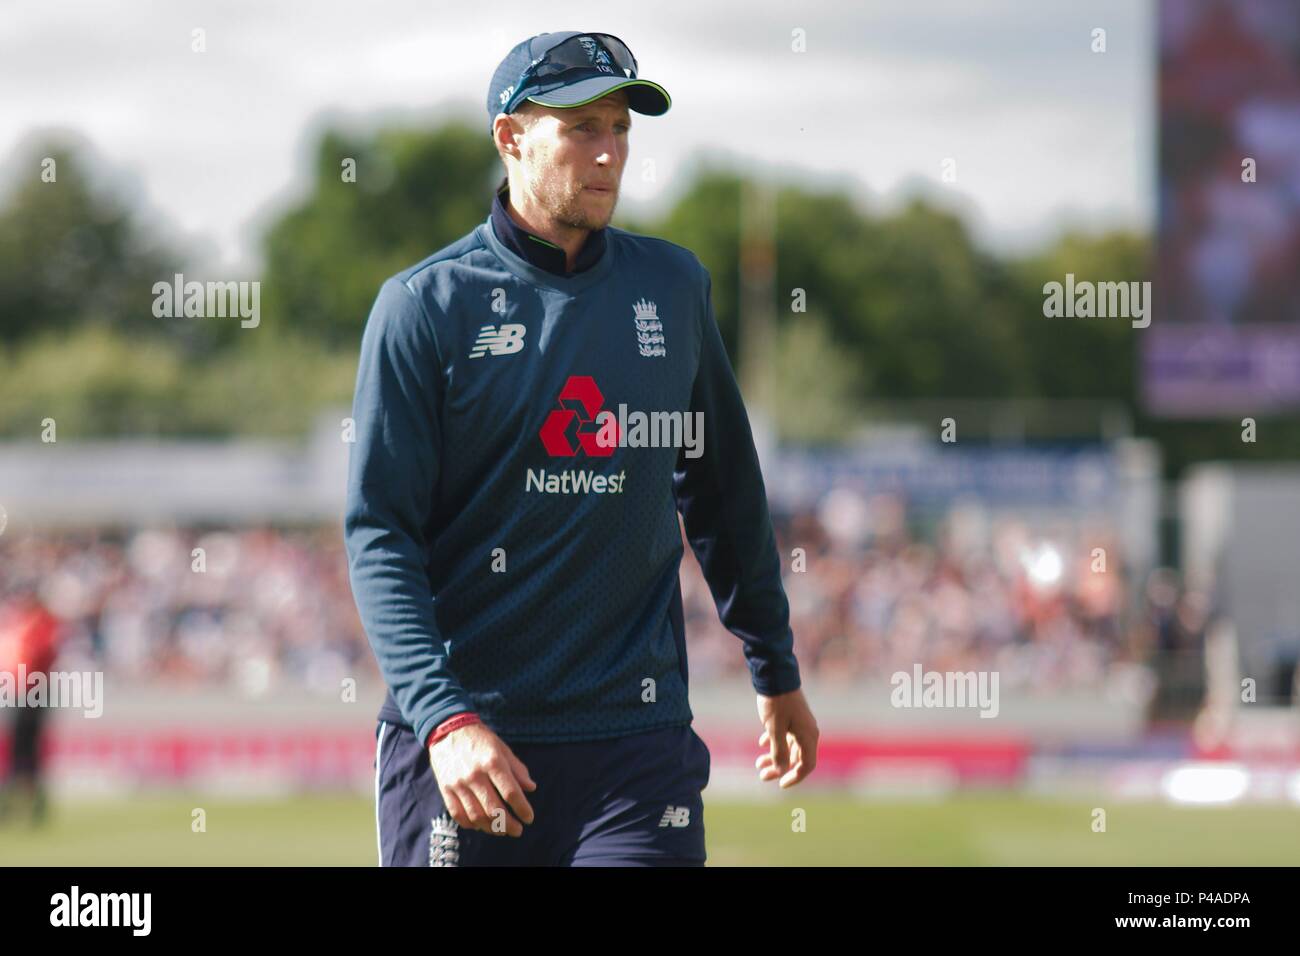 Chester-le-Street, England 21 June 2018. Joe Root fielding for England against Australia in the fourth ODI at Emirates Riverside. Credit: Colin Edwards/Alamy Live News. Stock Photo